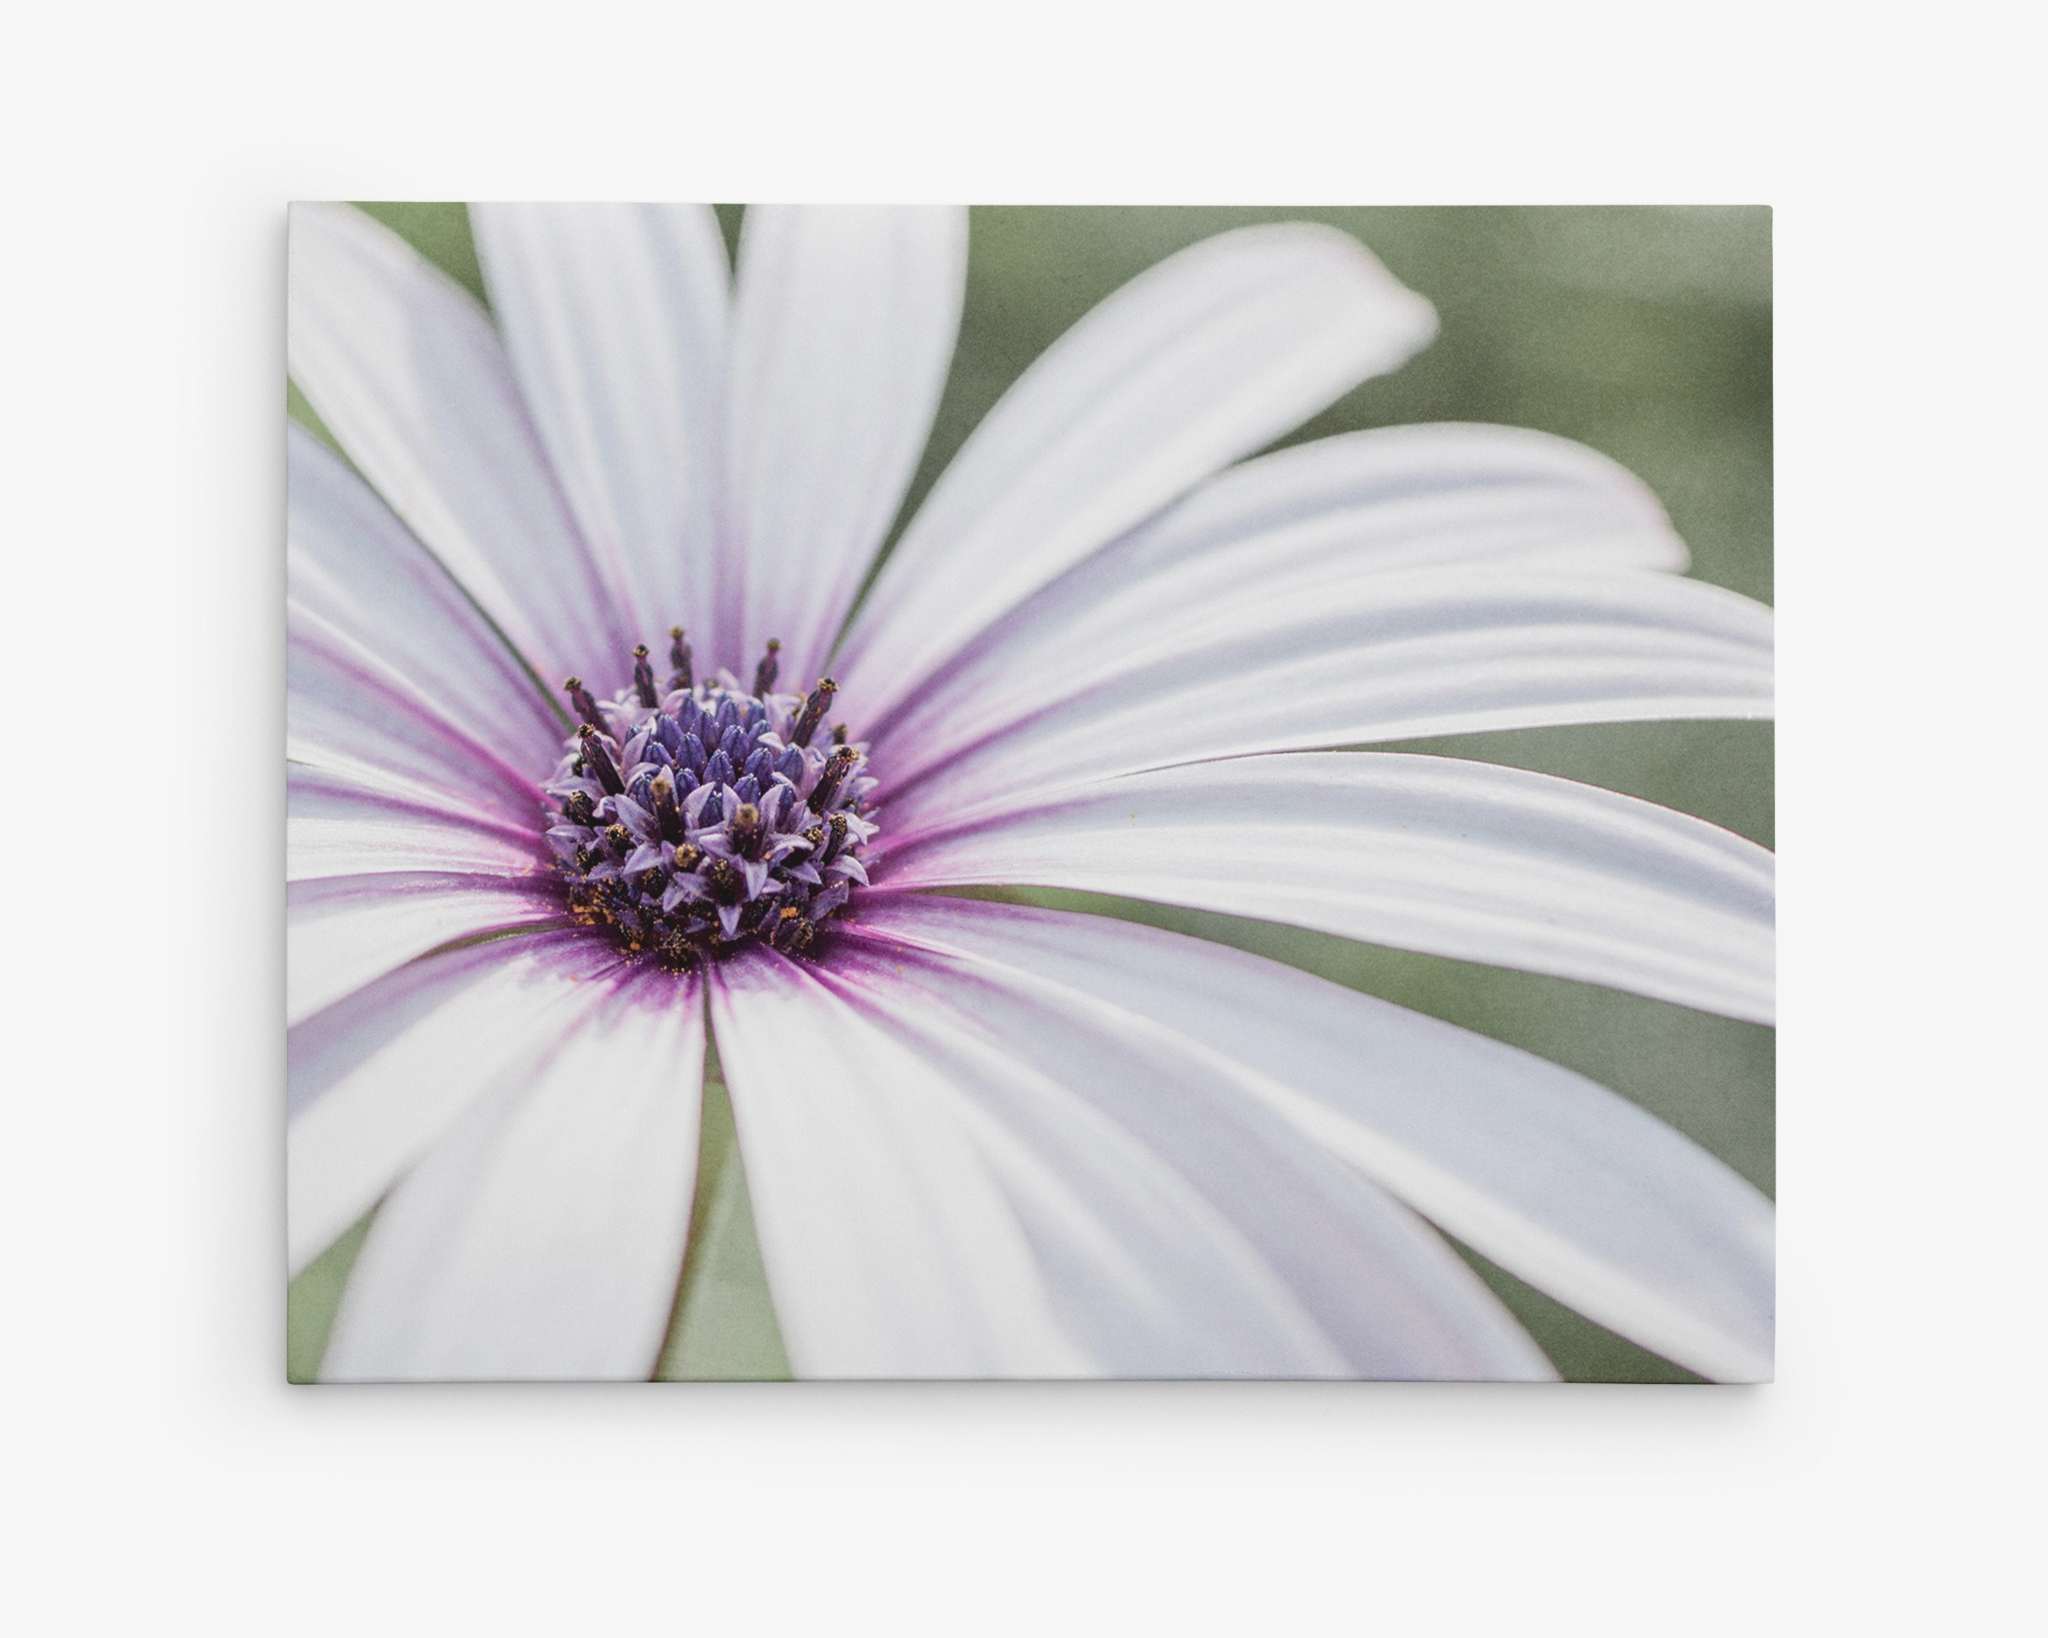 Close-up of a white daisy with a purple center. The background is blurred green, highlighting the delicate petals and intricate details of the flower's core. Mounted on an artist-grade poly-cotton blend canvas, this ready-to-hang solution captures the vibrant and sharp beauty of the daisy. Introducing Offley Green's Large White Daisy Flower Picture, Floral Wall Art, 'Bed of Petals'.